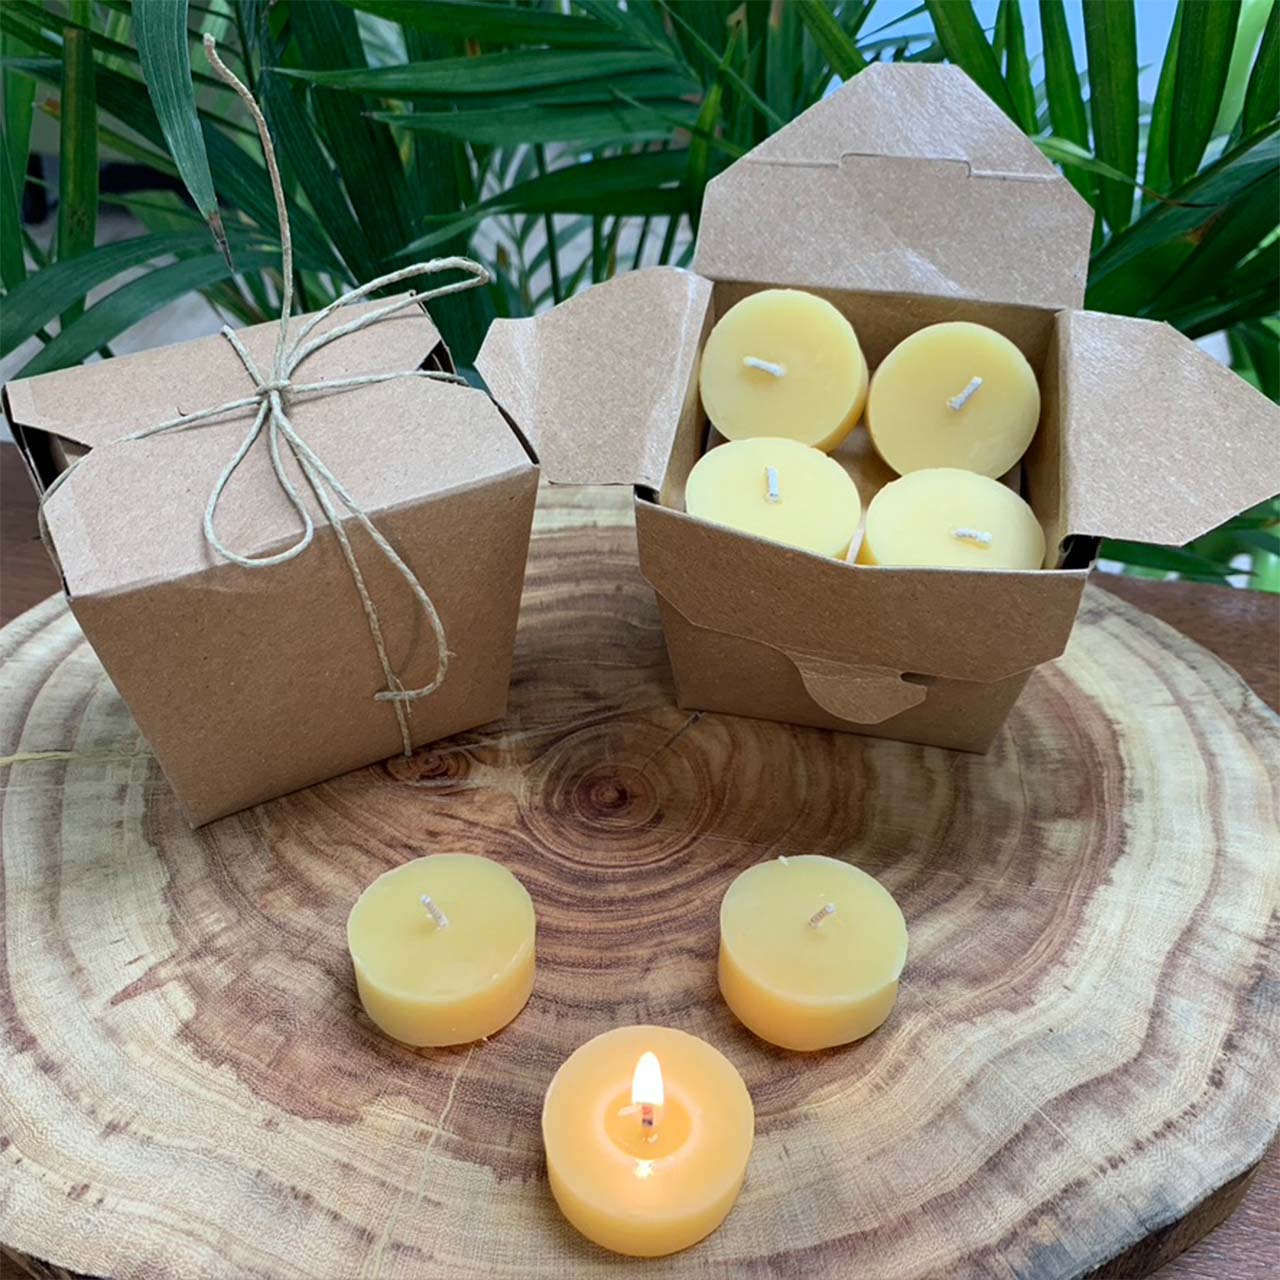 Waxed Cotton Votive Candle Wicks: 80 Pack | Betterbee